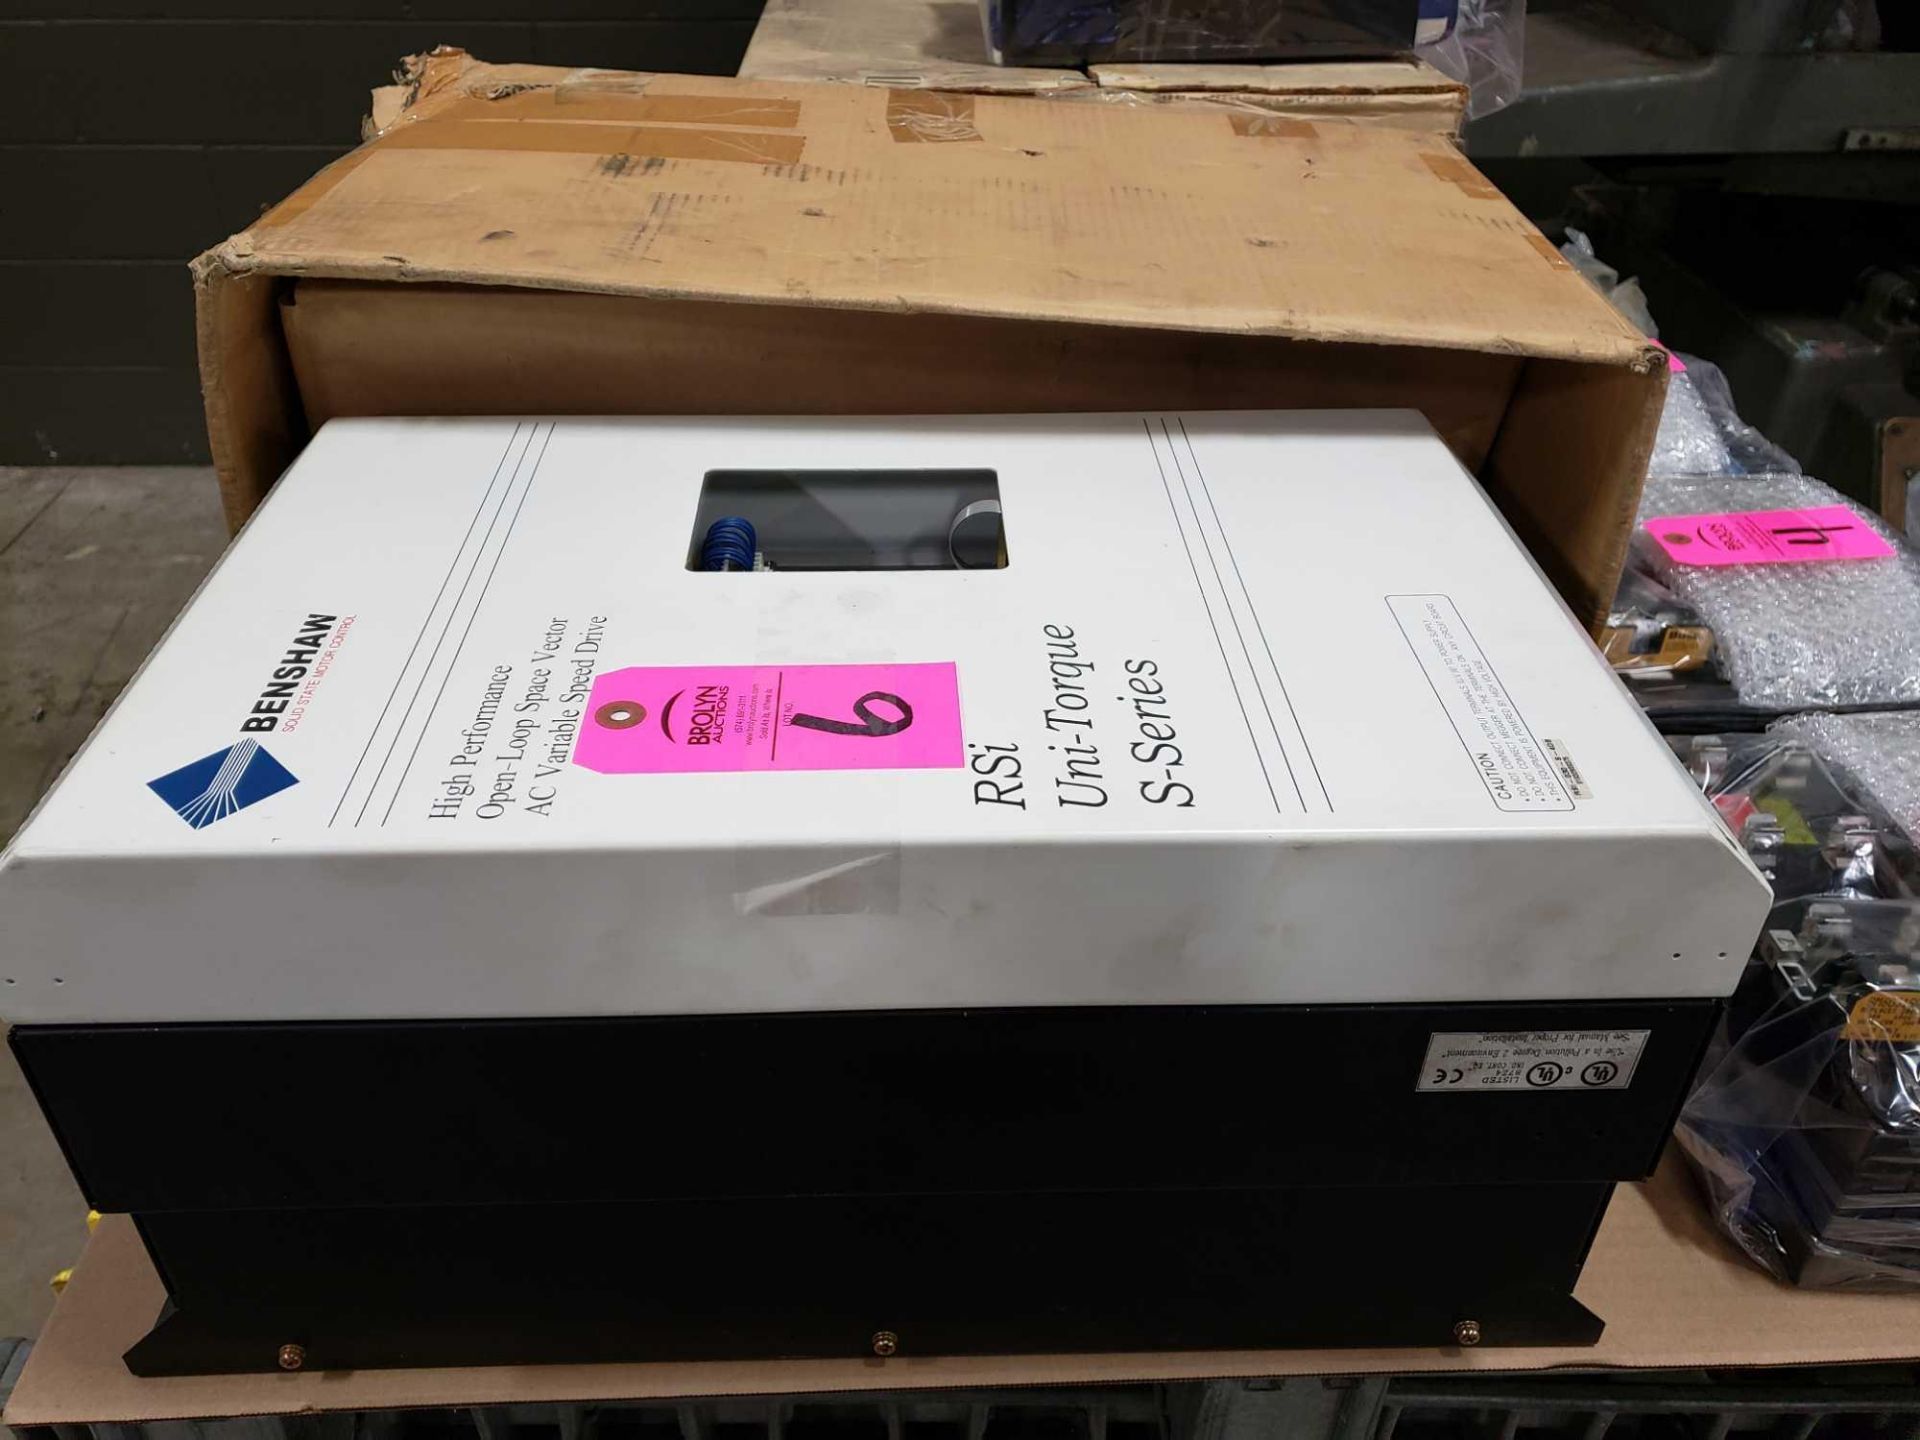 Benshaw RSI-030-S-4DB uni-torque S-series drive. Appears unused with box. Does not include keypad.